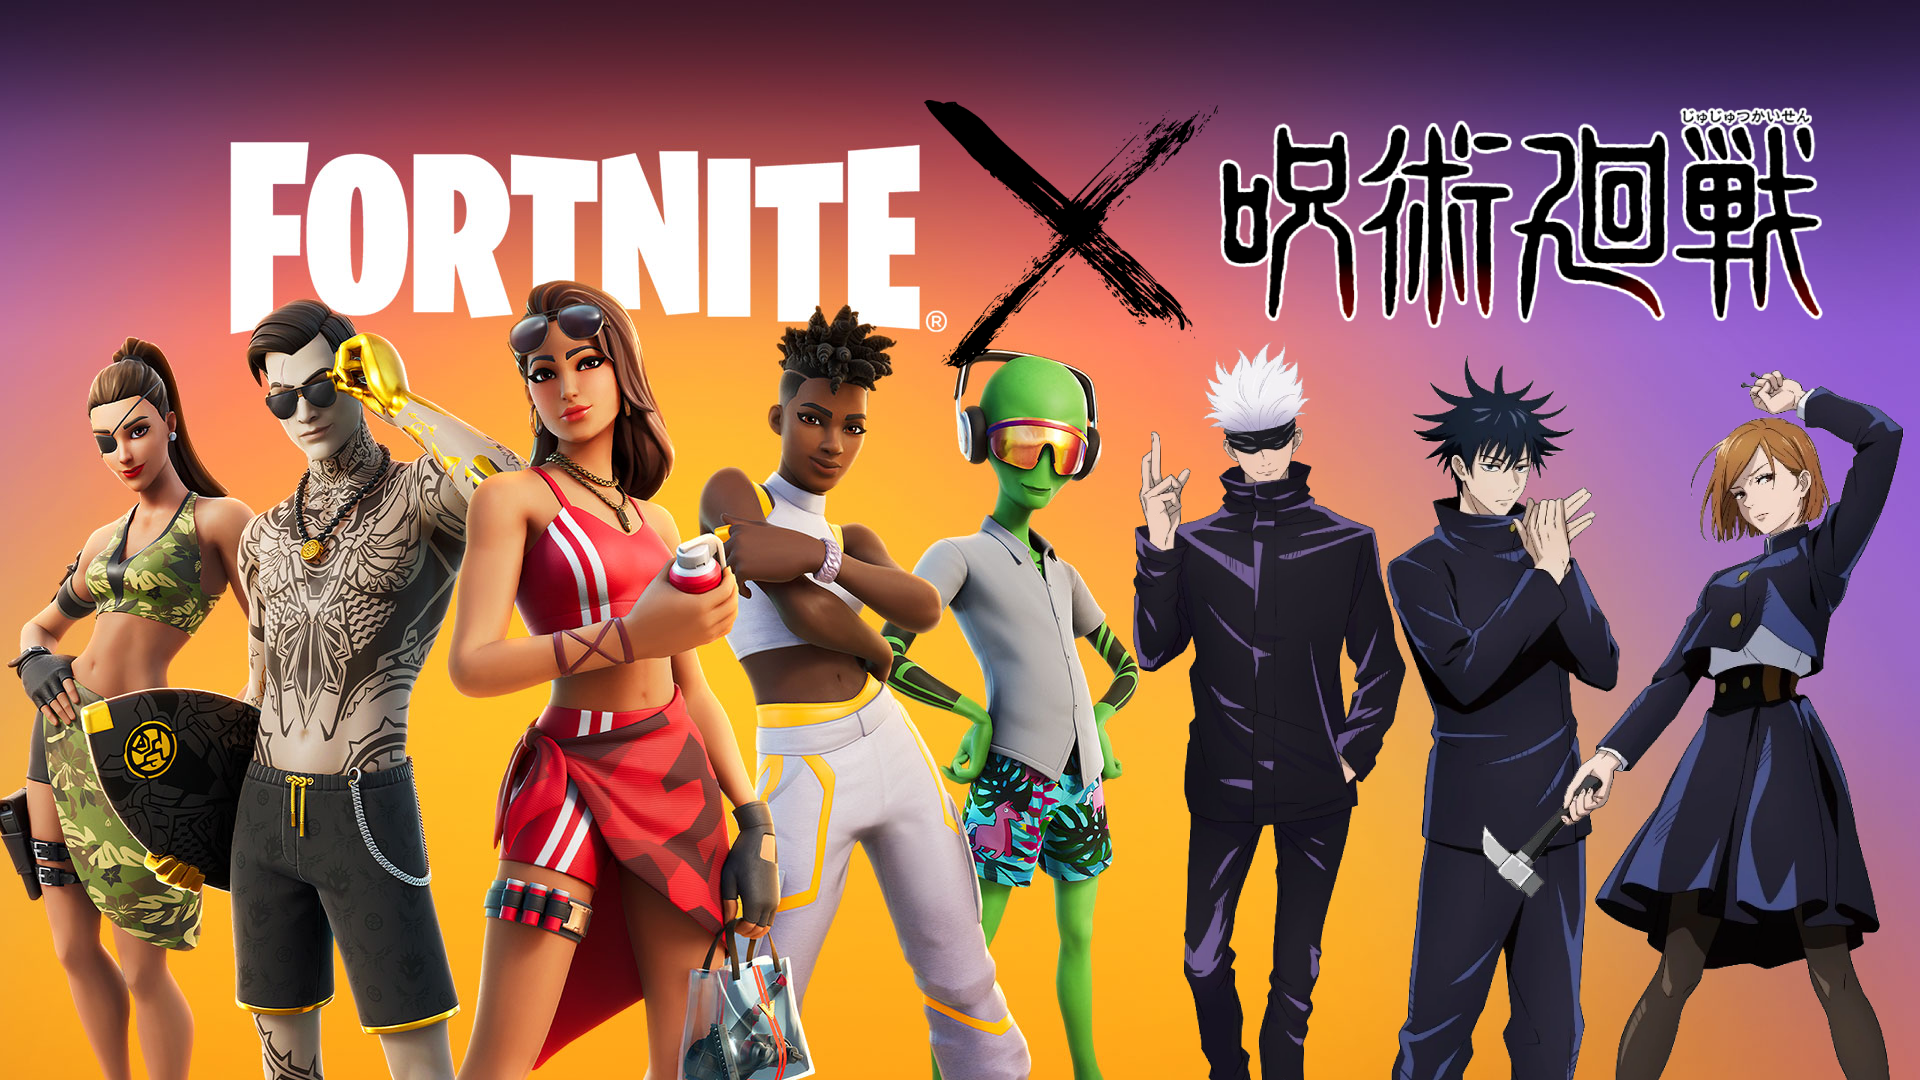 Fortnite's new Jujutsu Kaisen anime collab adds themed outfits and quests -  The Verge